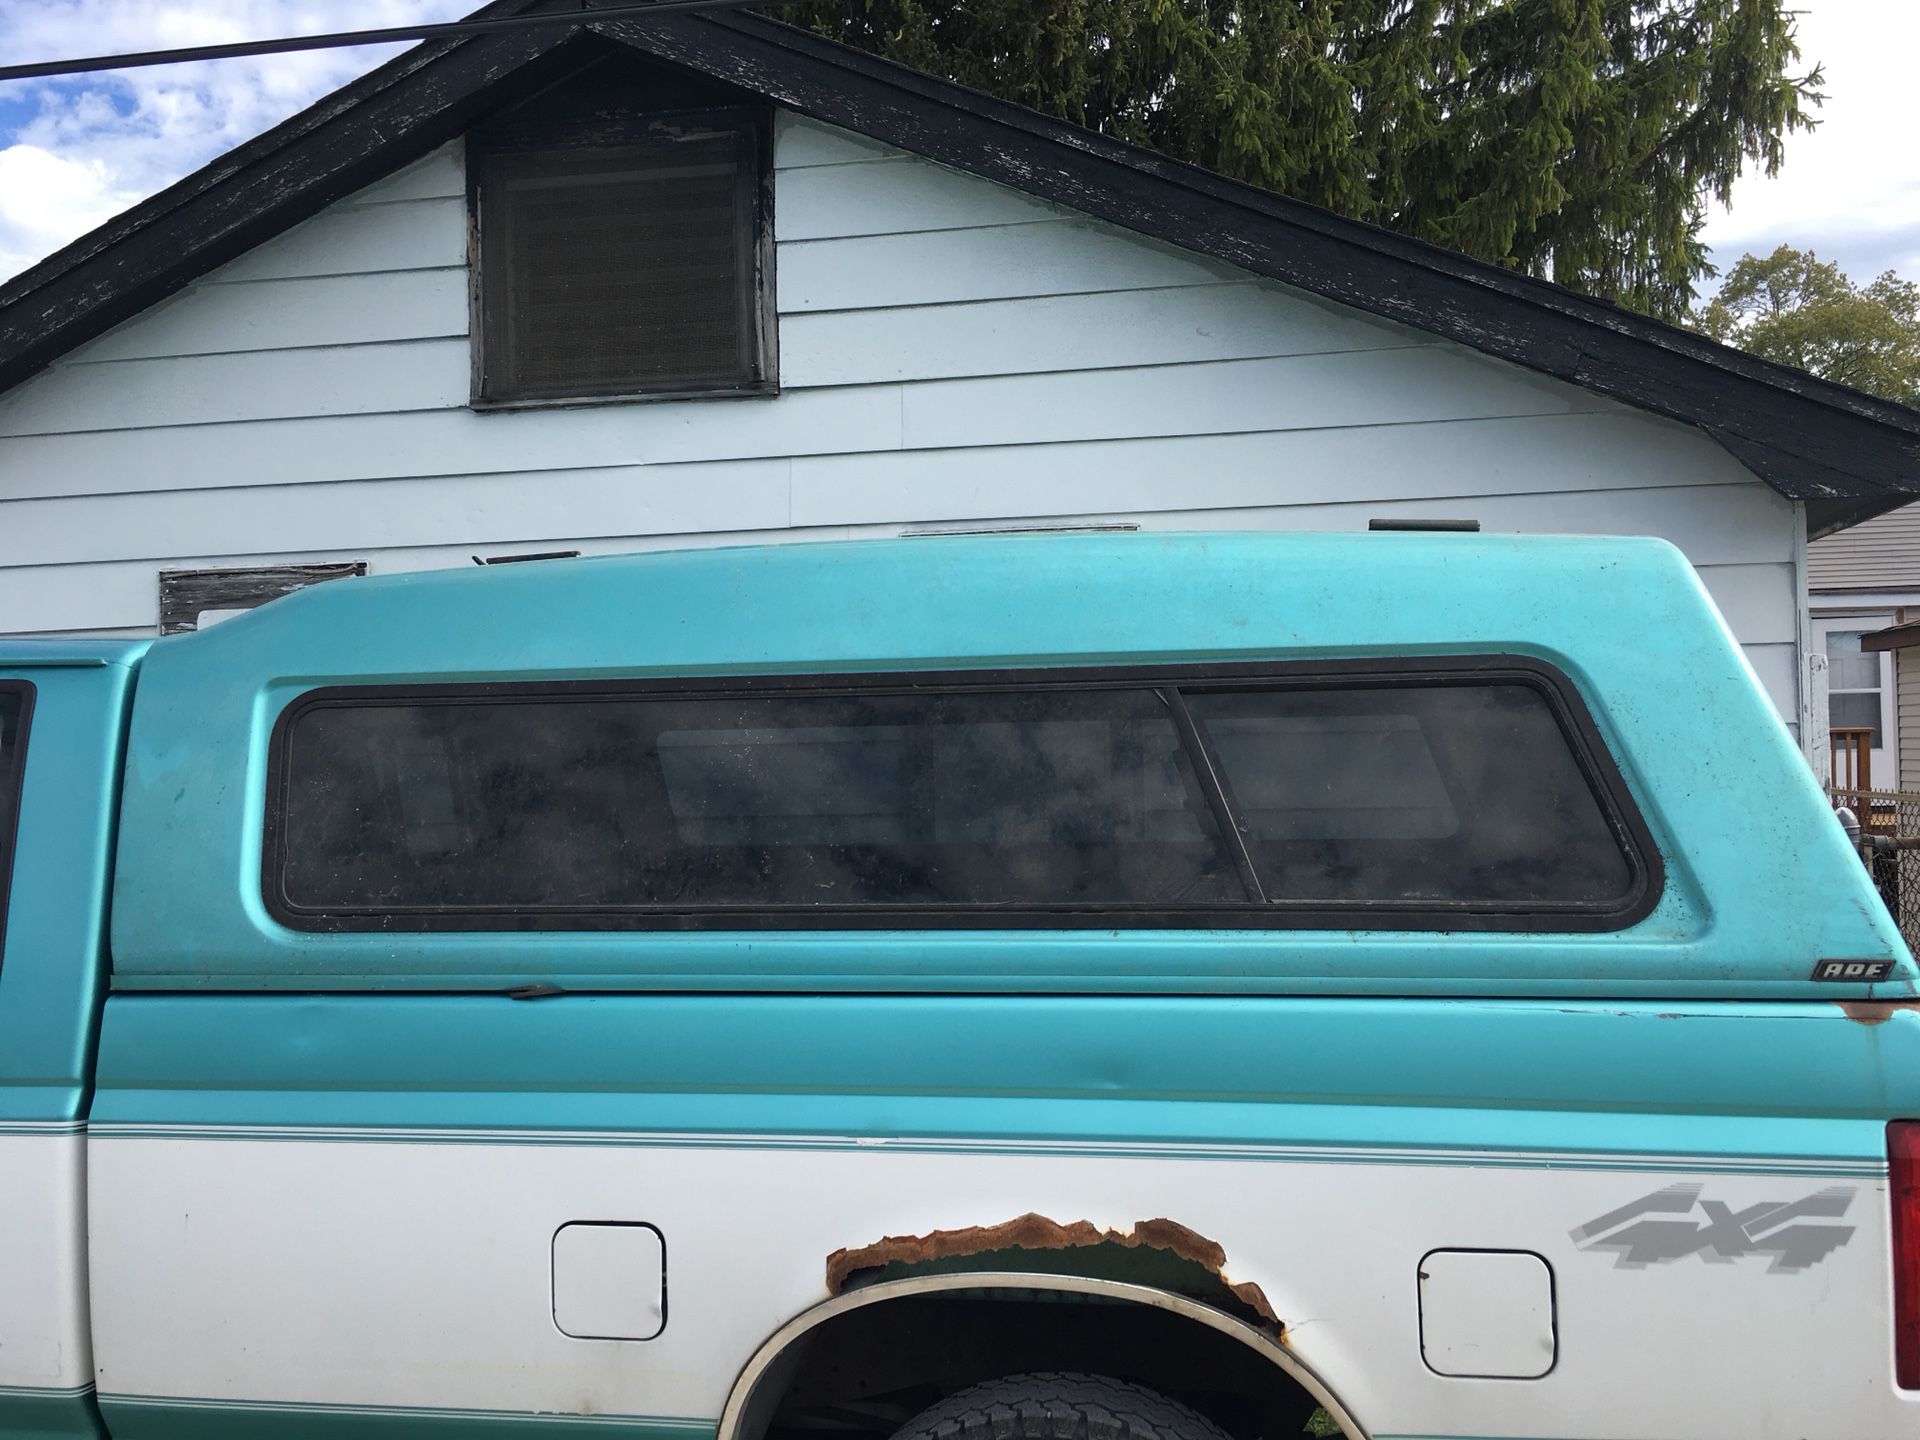 Camper for sale from 1996 Ford F-250 disel... asking 300 obo